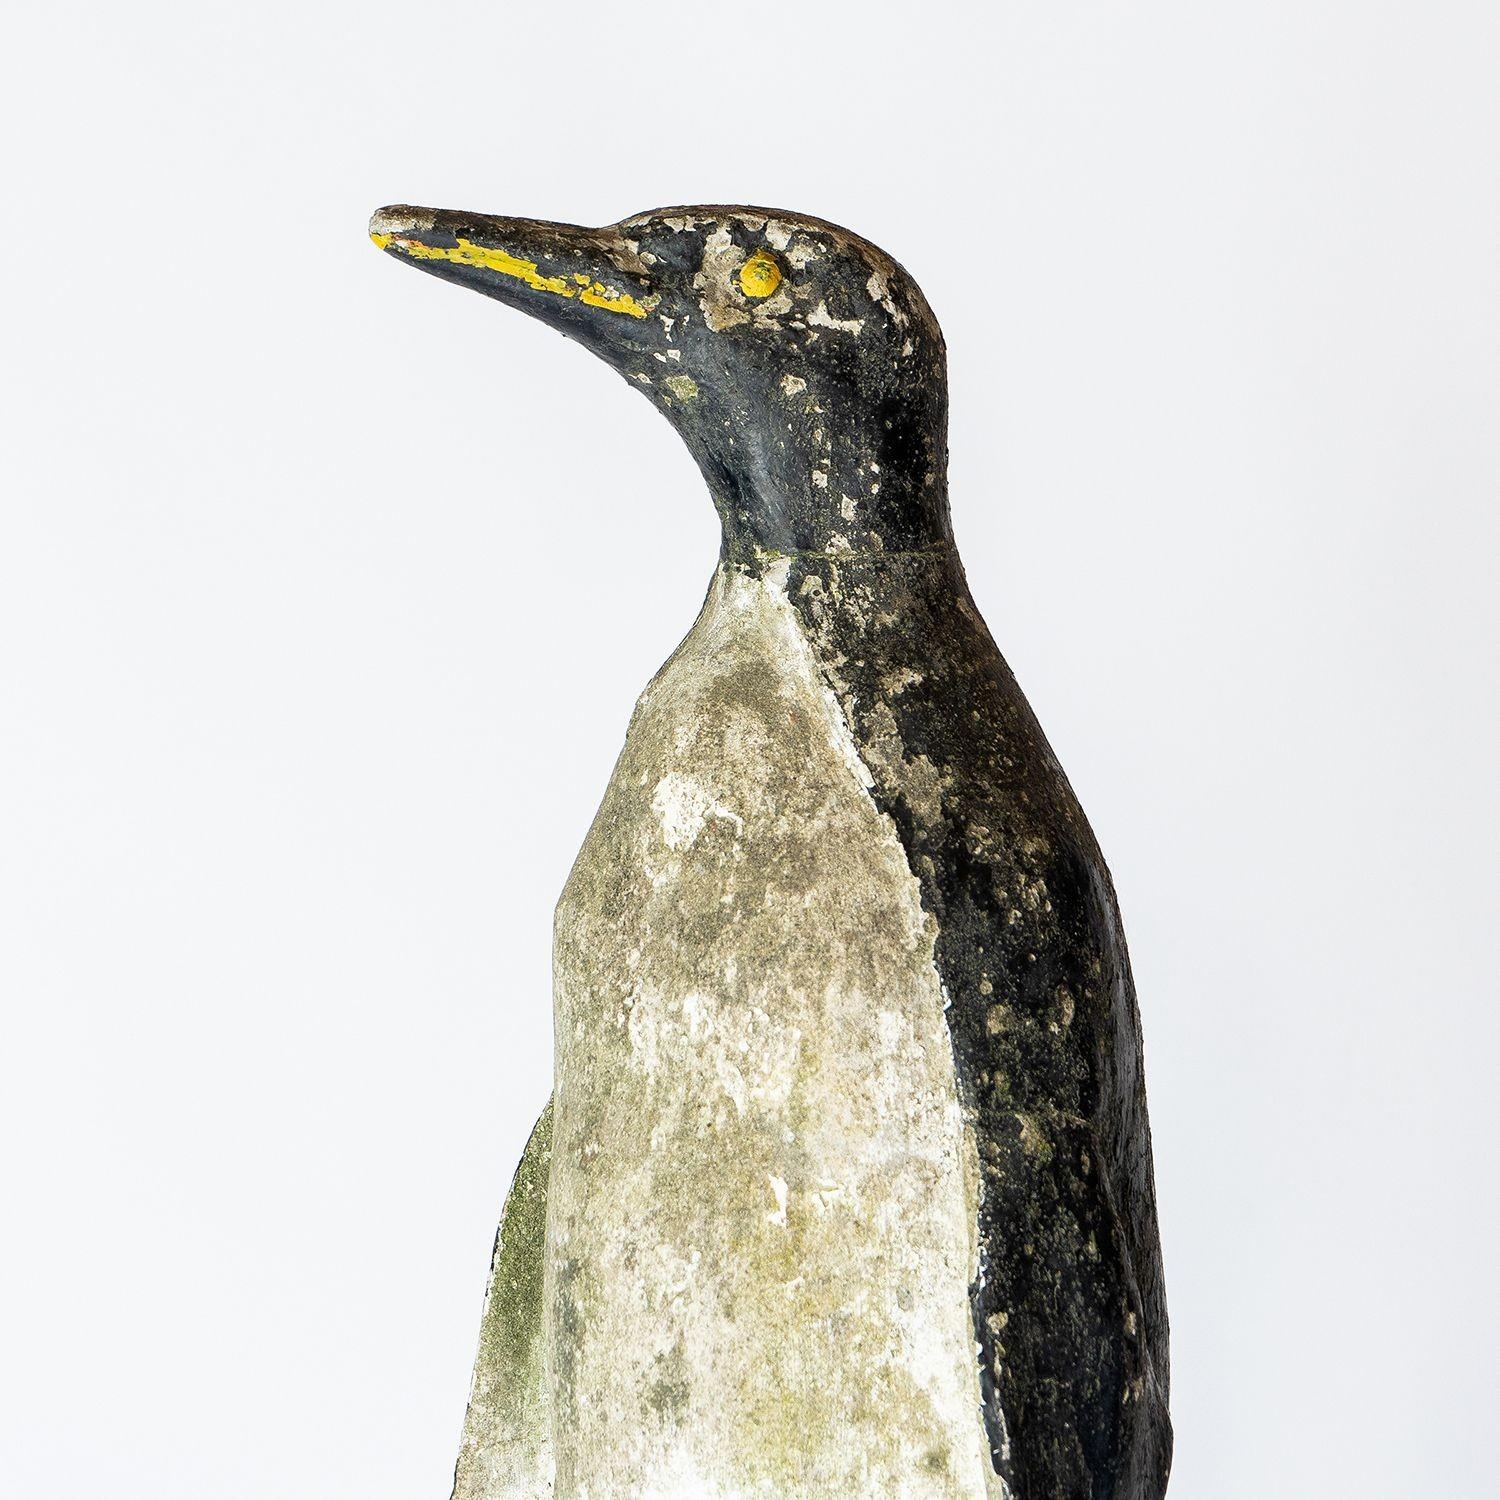 Hand-Painted Vintage French Reconstituted Stone Penguin Garden Statue Figure c. 1930s